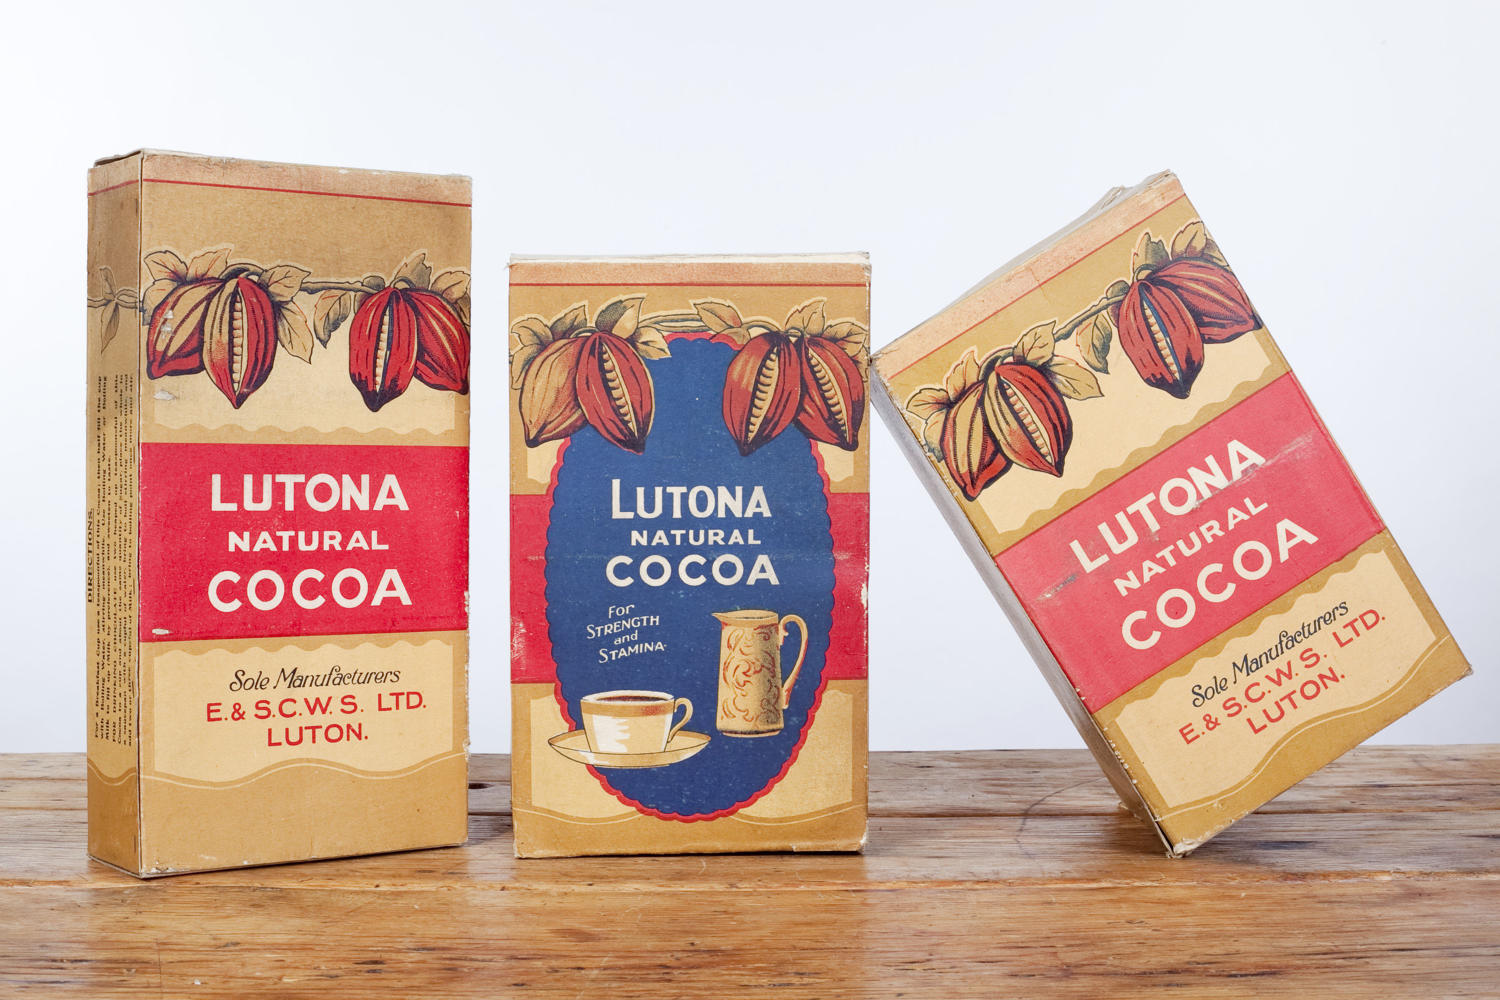 Lutona natural cocoa 'dummy packaging'